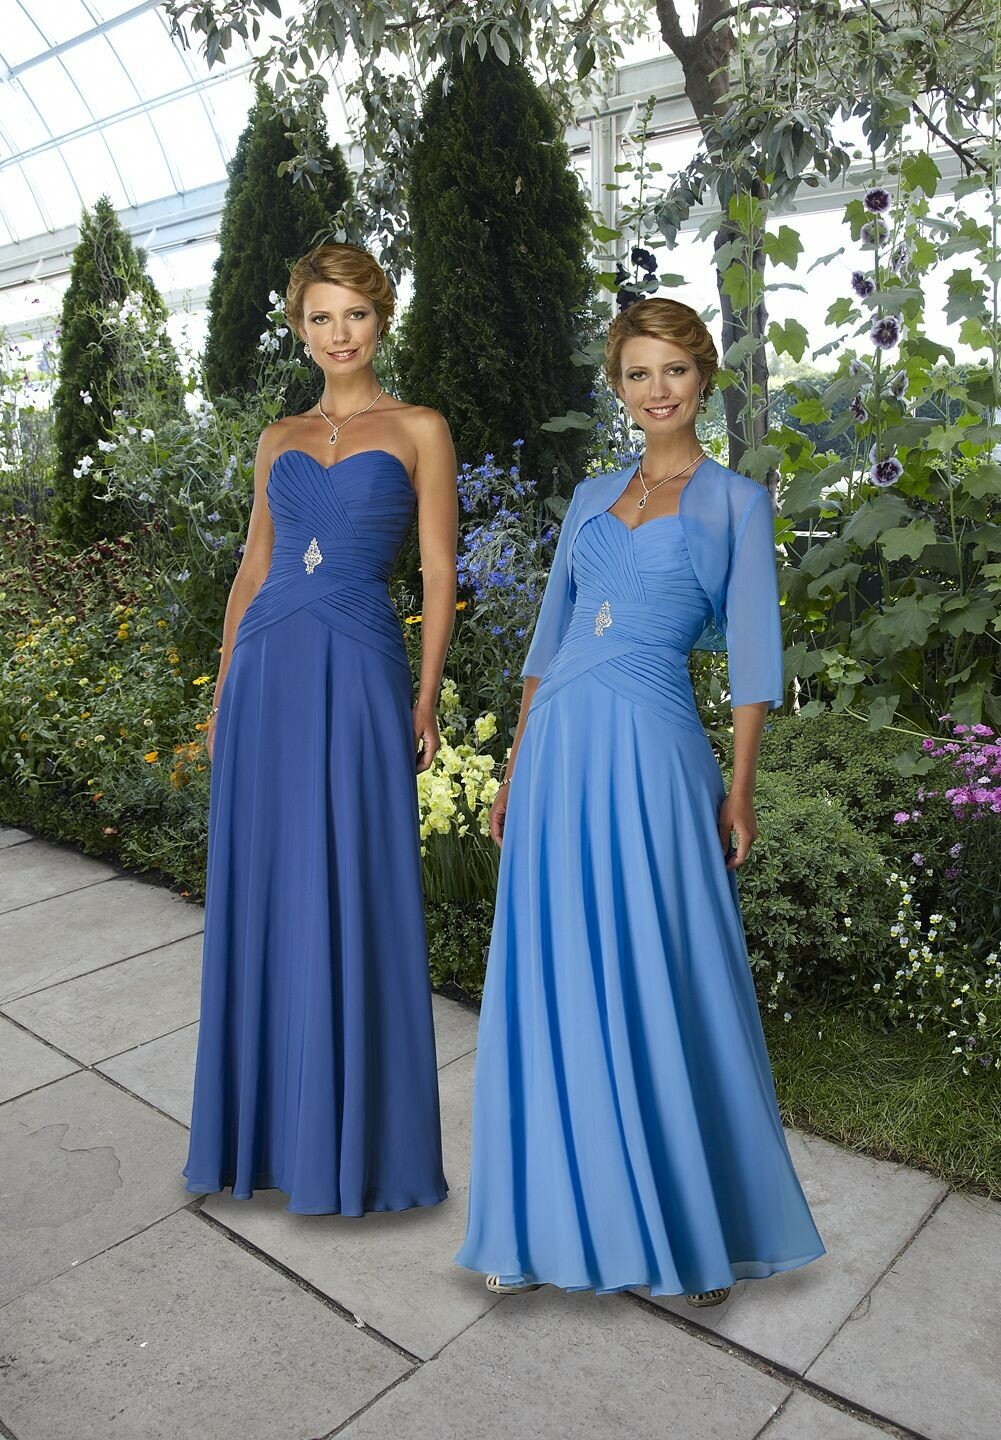 Summer wedding mother of the bride dresses Photo - 5